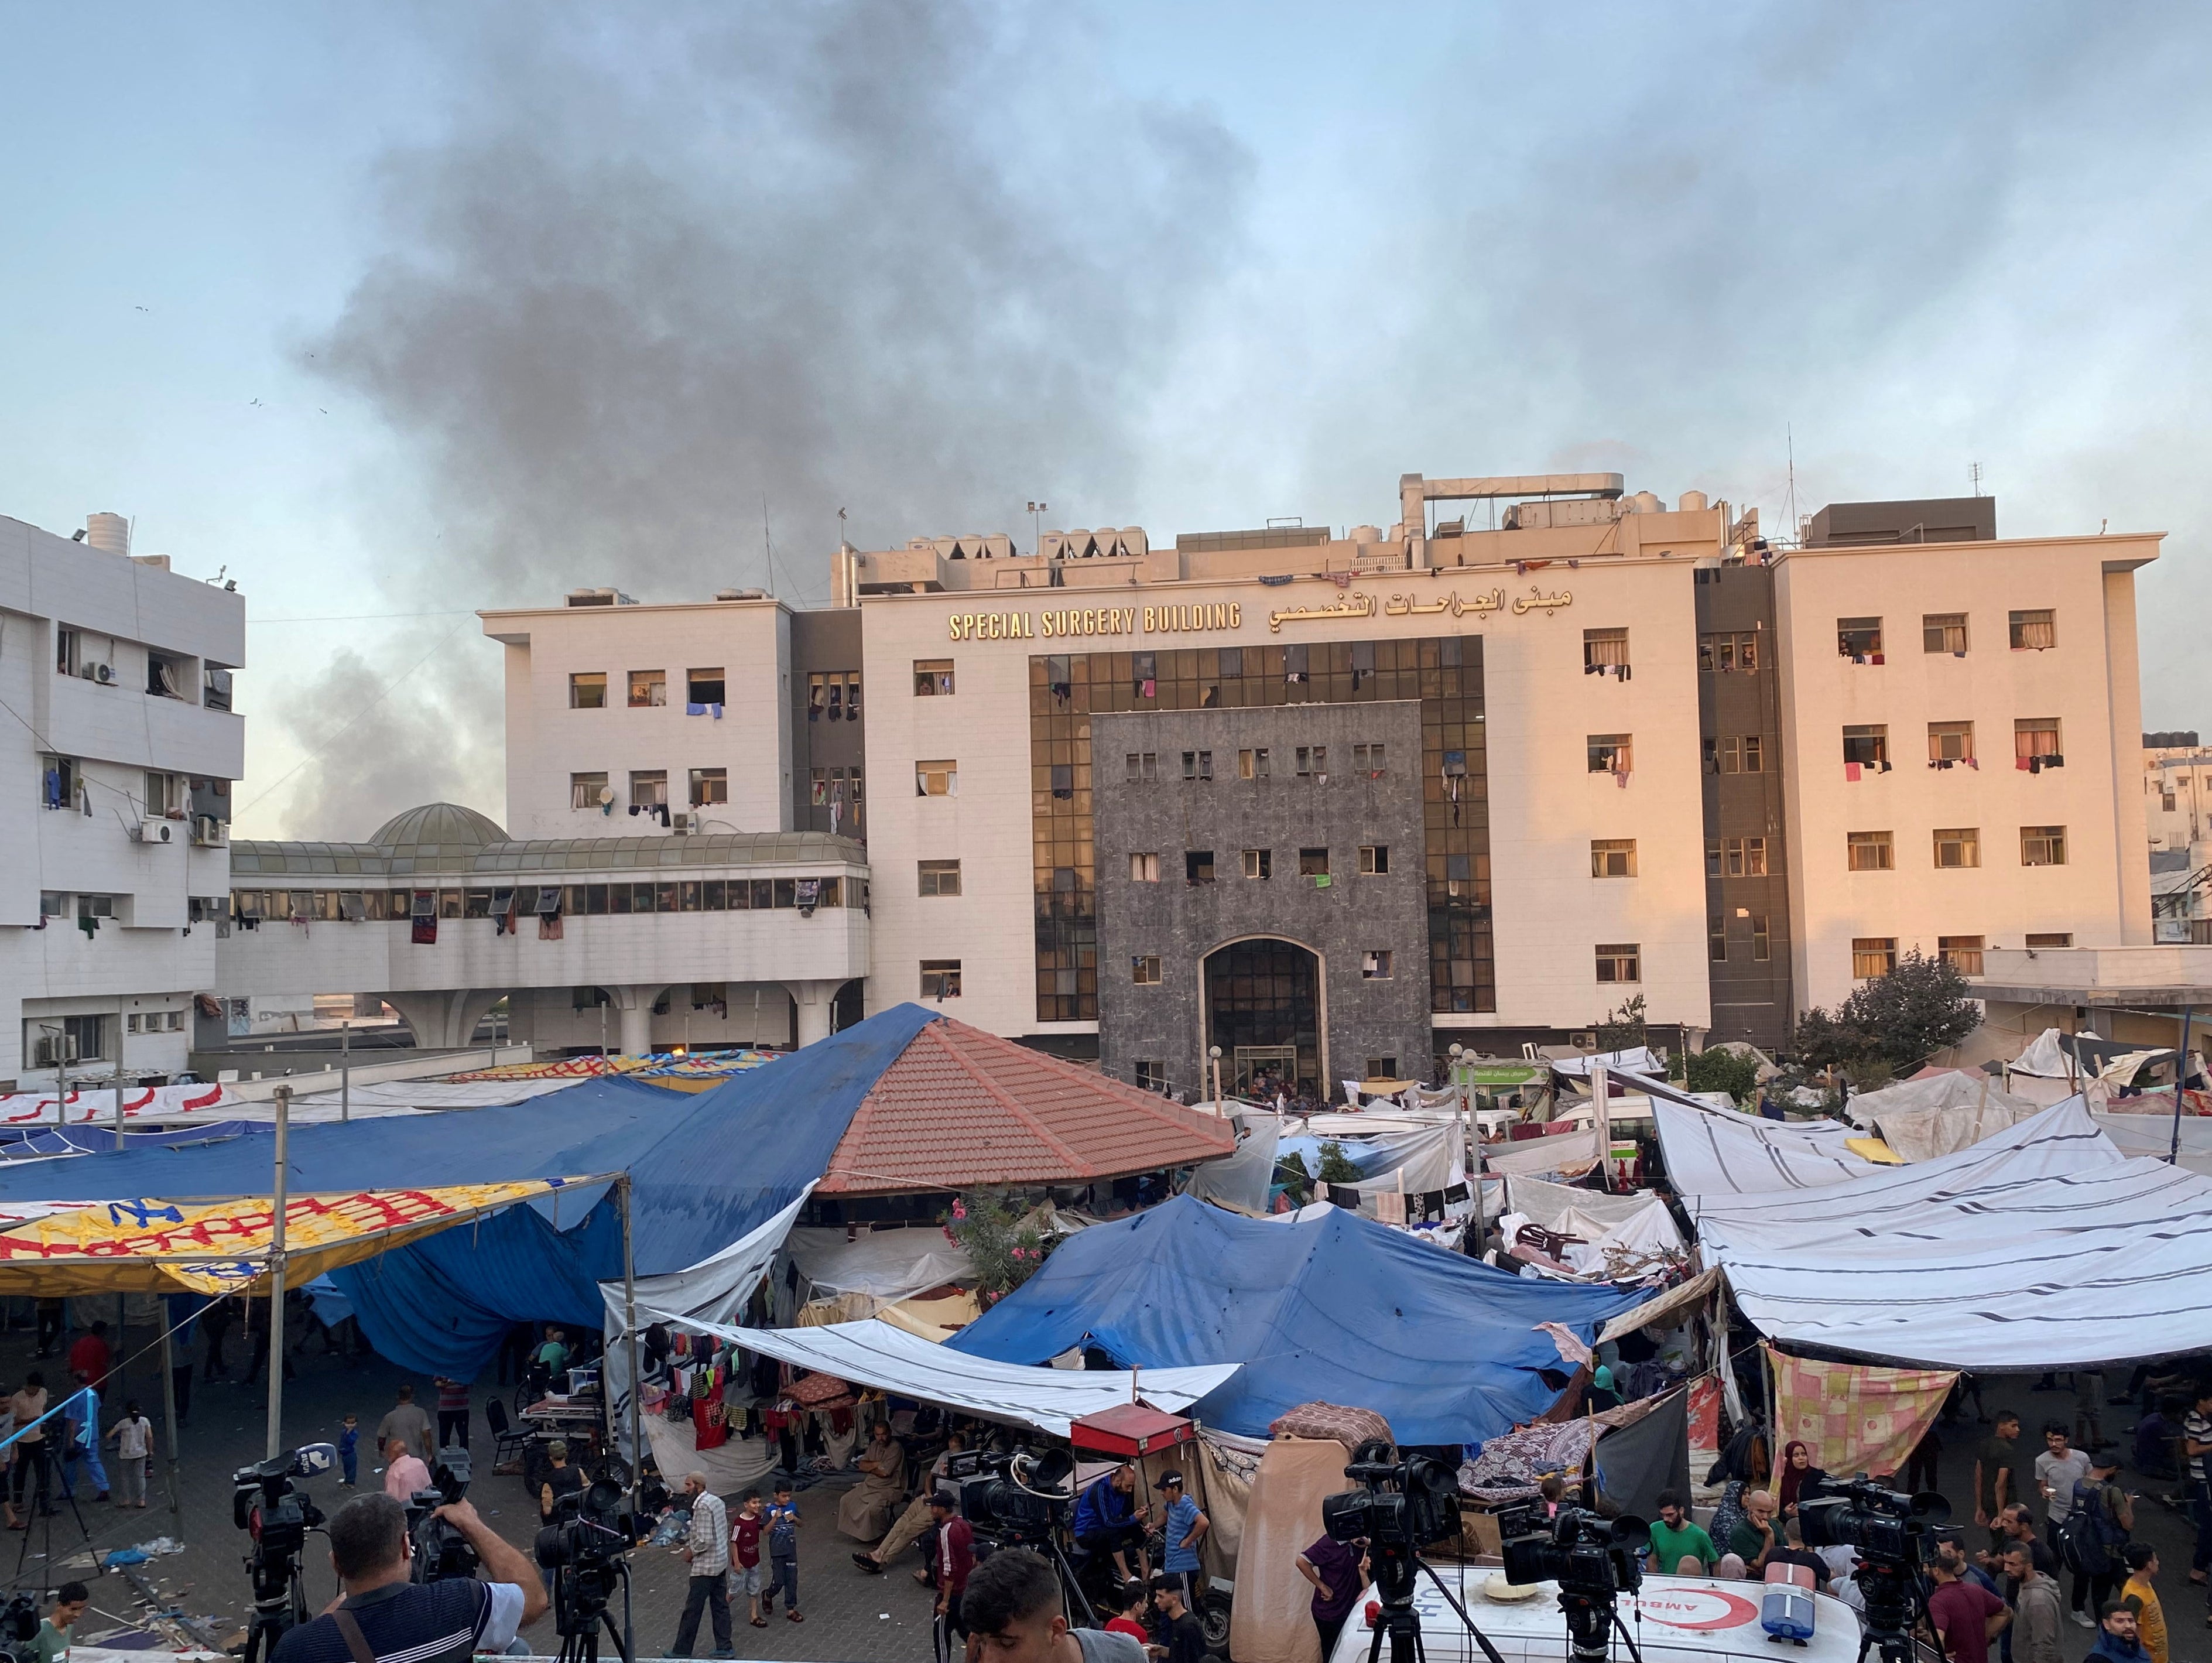 Palestinians had previously been sheltering at al-Shifa Hospital, which was surrounded by Israeli troops in recent days